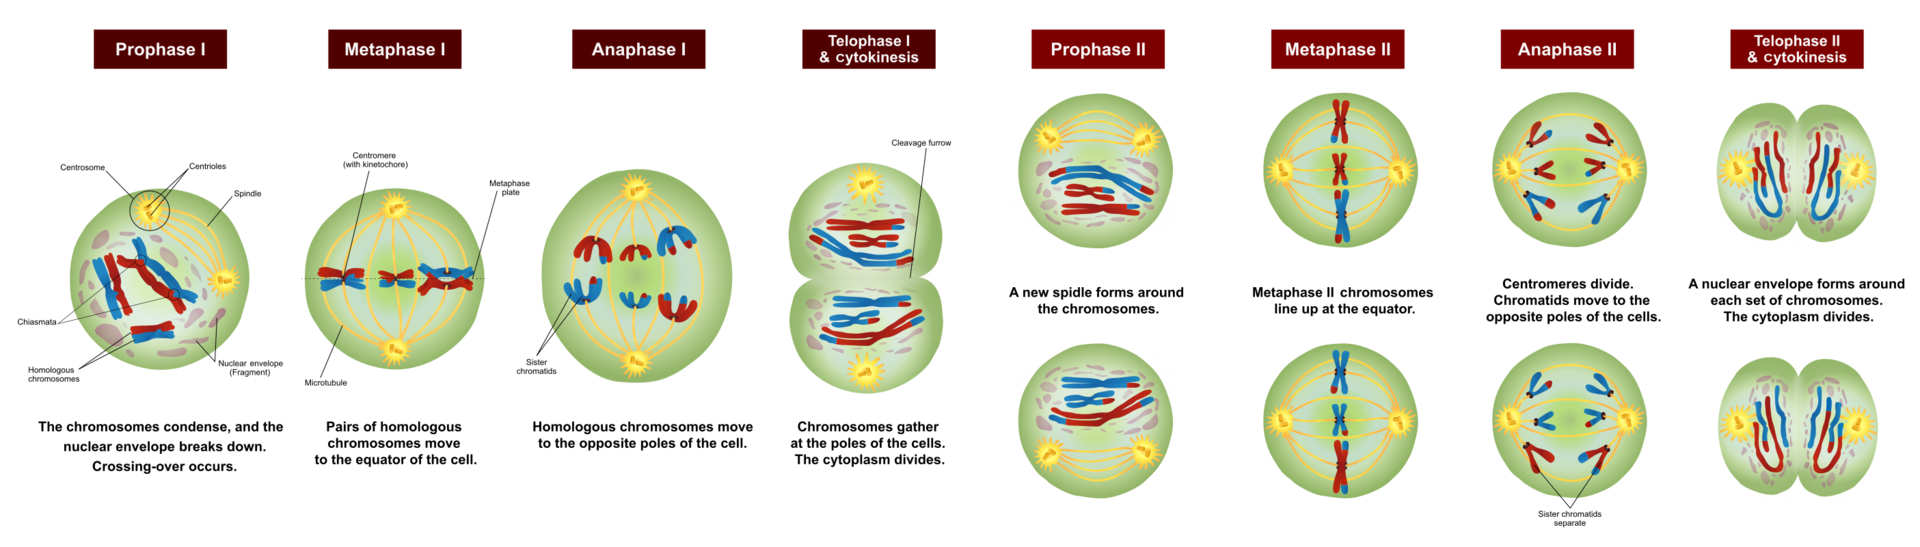 what is the difference between anaphase 1 and 2